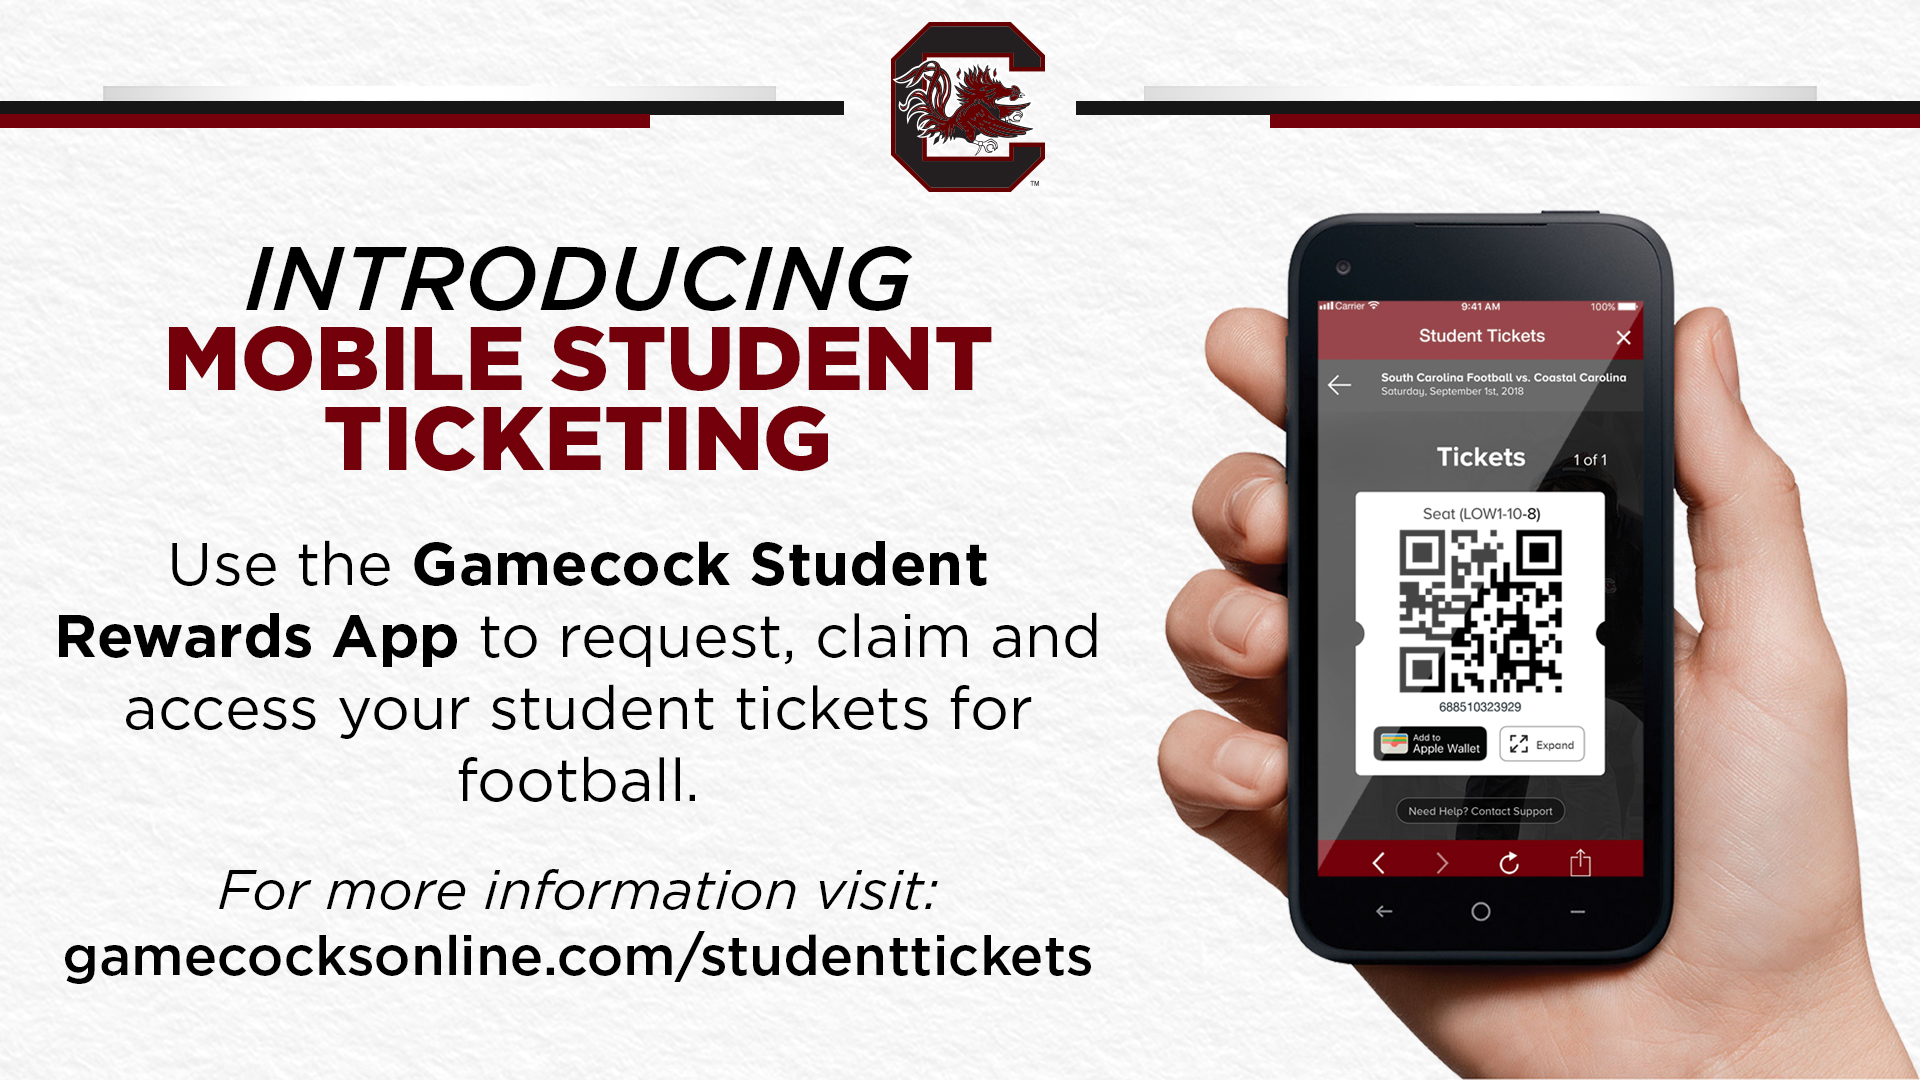 New Era of Gamecock Student Tickets Continues with 2018 Football Season